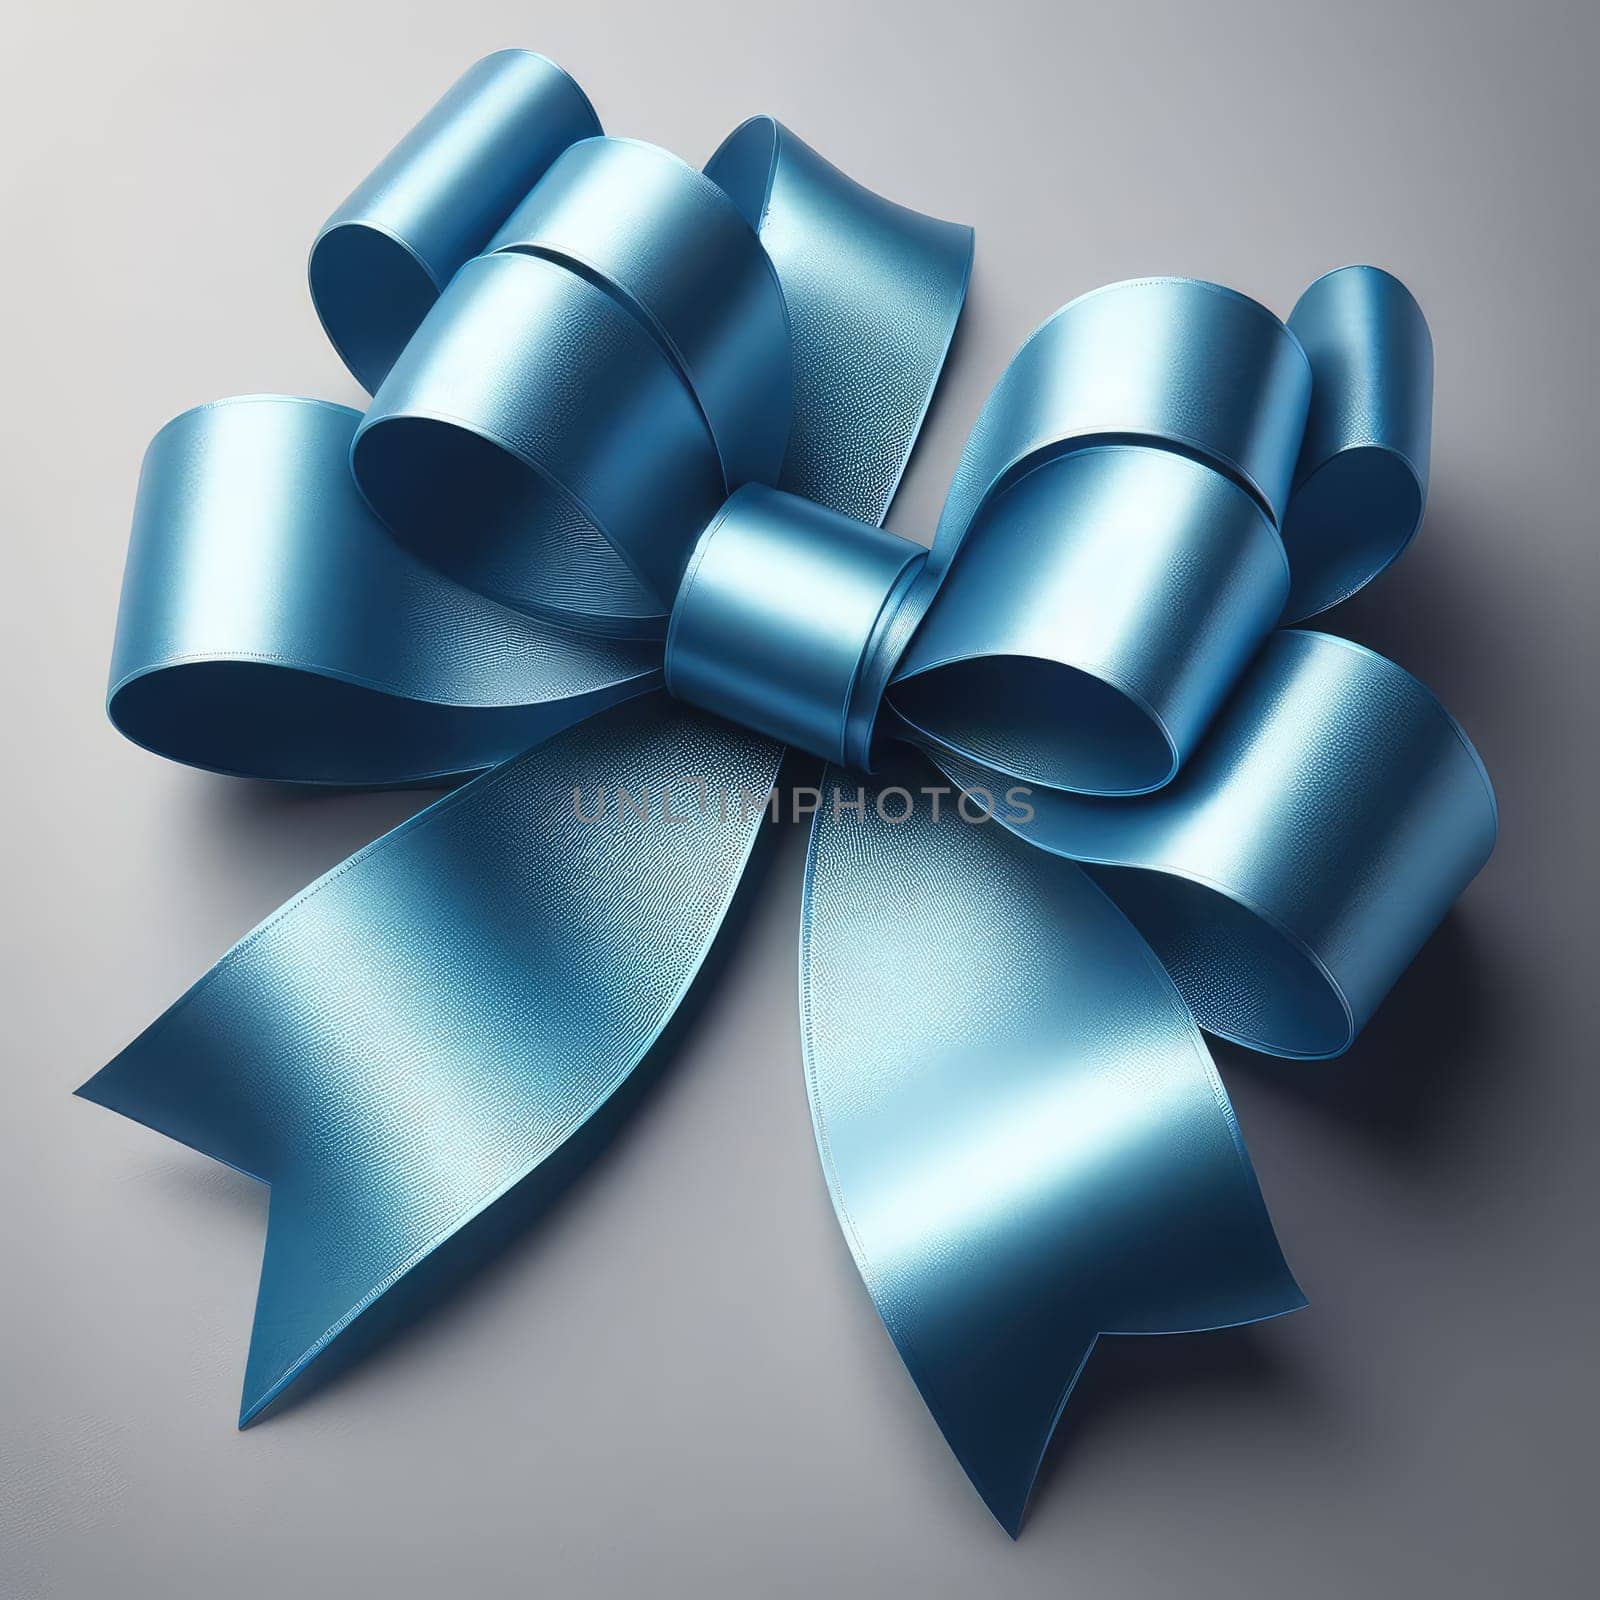 Close-up of open gift box against light blue background. Blue gift ribbon with a bow against a gray background